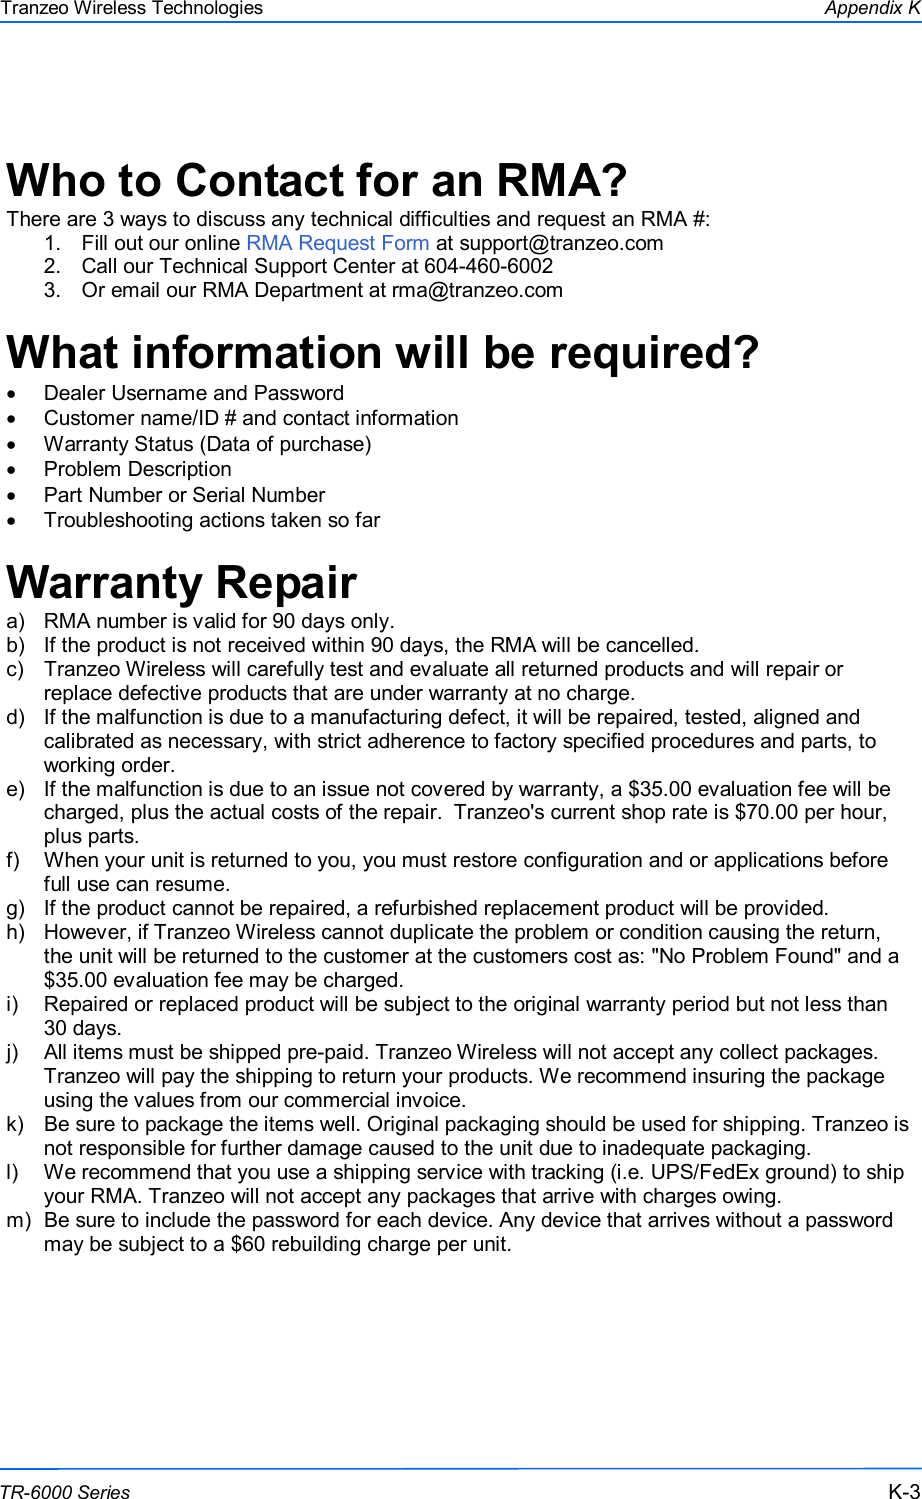  333 This document is intended for Public Distribution                         19473 Fraser Way, Pitt Meadows, B.C. Canada V3Y  2V4 Appendix K K-3 TR-6000 Series Tranzeo Wireless Technologies  Who to Contact for an RMA? There are 3 ways to discuss any technical difficulties and request an RMA #:  1.  Fill out our online RMA Request Form at support@tranzeo.com  2.  Call our Technical Support Center at 604-460-6002 3.  Or email our RMA Department at rma@tranzeo.com  What information will be required? •  Dealer Username and Password •  Customer name/ID # and contact information •  Warranty Status (Data of purchase) •  Problem Description •  Part Number or Serial Number •  Troubleshooting actions taken so far  Warranty Repair a)  RMA number is valid for 90 days only. b)  If the product is not received within 90 days, the RMA will be cancelled. c)  Tranzeo Wireless will carefully test and evaluate all returned products and will repair or replace defective products that are under warranty at no charge. d)  If the malfunction is due to a manufacturing defect, it will be repaired, tested, aligned and calibrated as necessary, with strict adherence to factory specified procedures and parts, to working order. e)  If the malfunction is due to an issue not covered by warranty, a $35.00 evaluation fee will be charged, plus the actual costs of the repair.  Tranzeo&apos;s current shop rate is $70.00 per hour, plus parts. f)  When your unit is returned to you, you must restore configuration and or applications before full use can resume. g)  If the product cannot be repaired, a refurbished replacement product will be provided. h)  However, if Tranzeo Wireless cannot duplicate the problem or condition causing the return, the unit will be returned to the customer at the customers cost as: &quot;No Problem Found&quot; and a $35.00 evaluation fee may be charged. i)  Repaired or replaced product will be subject to the original warranty period but not less than 30 days. j)  All items must be shipped pre-paid. Tranzeo Wireless will not accept any collect packages. Tranzeo will pay the shipping to return your products. We recommend insuring the package using the values from our commercial invoice. k)  Be sure to package the items well. Original packaging should be used for shipping. Tranzeo is not responsible for further damage caused to the unit due to inadequate packaging. l)  We recommend that you use a shipping service with tracking (i.e. UPS/FedEx ground) to ship your RMA. Tranzeo will not accept any packages that arrive with charges owing. m)  Be sure to include the password for each device. Any device that arrives without a password may be subject to a $60 rebuilding charge per unit.    